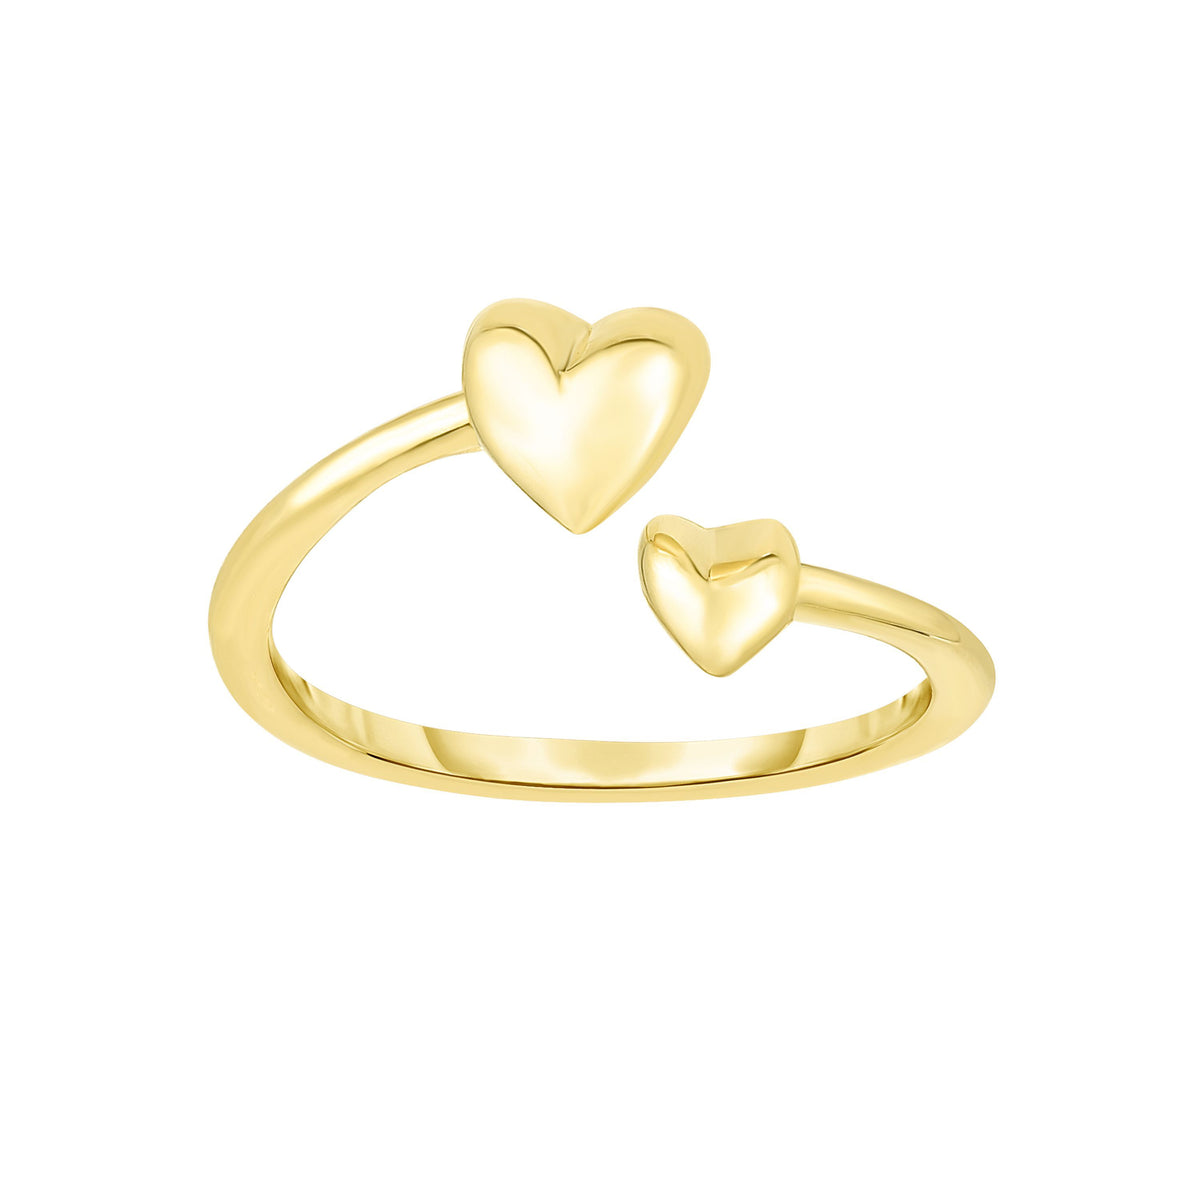 14K Yellow Gold Hearts Bypass Toe Ring 9mm